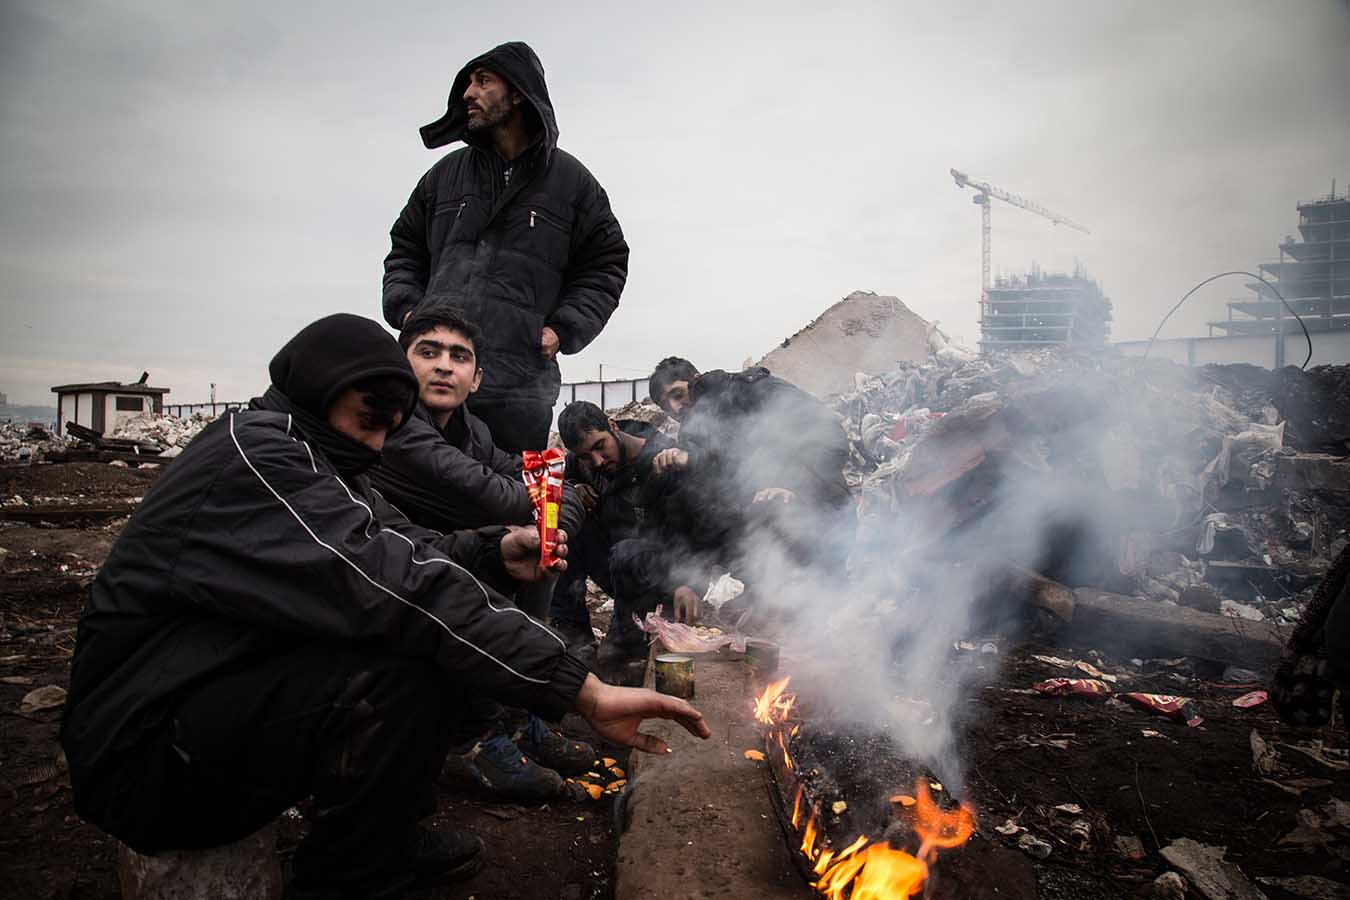  Afghani migrants warm themselves sitting around an open fire, just outside the “Barracks”, a derelict complex of industrial building in the area of Belgrade’s Central Station.  Since Summer 2016, an increasing number of migrants have been stuck in S